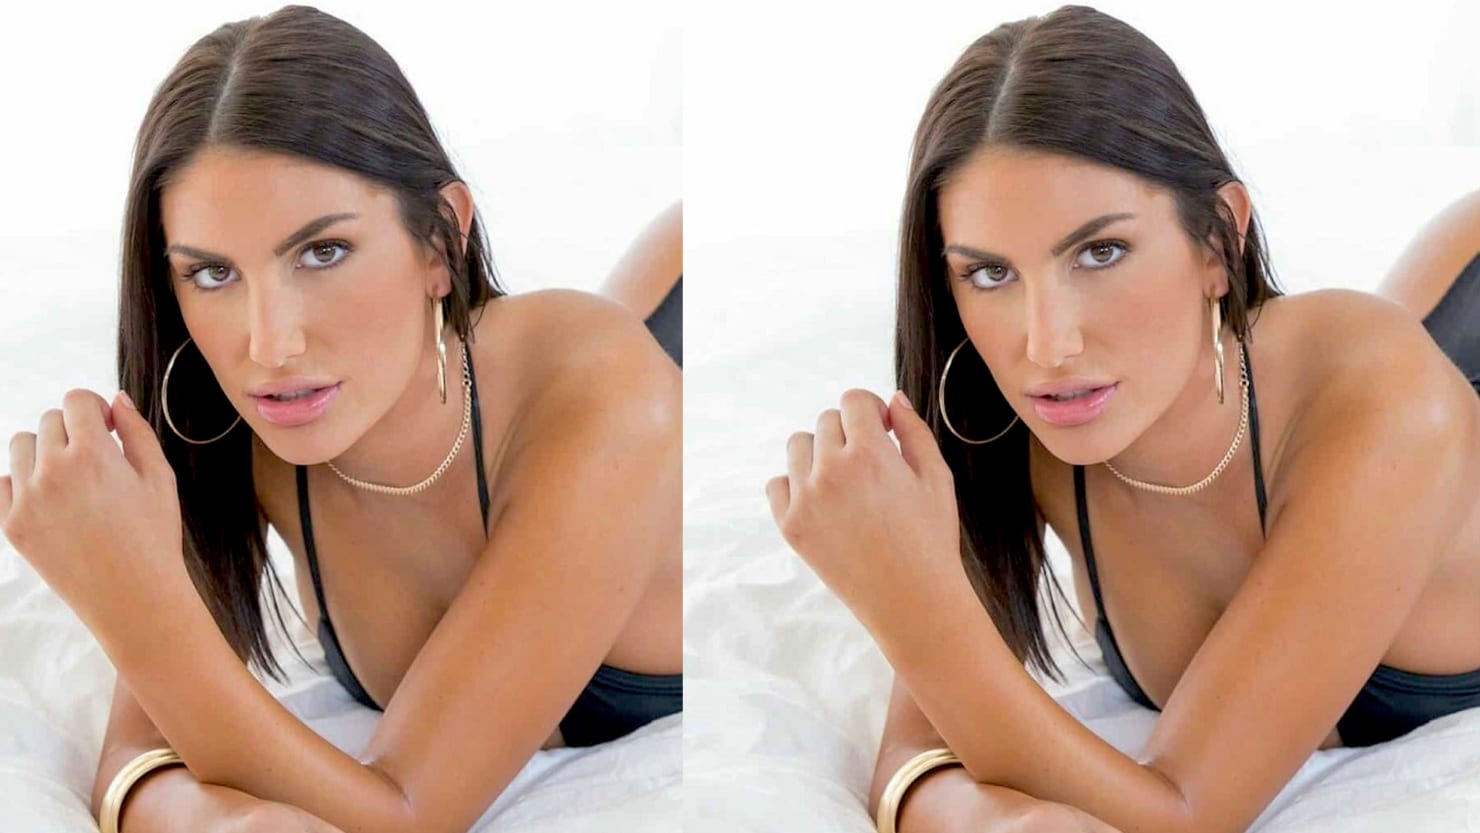 August Aimes Porn Photoshoot - Mother of 'Cyberbullied' Porn Star August Ames Opens Up About Her Last Days